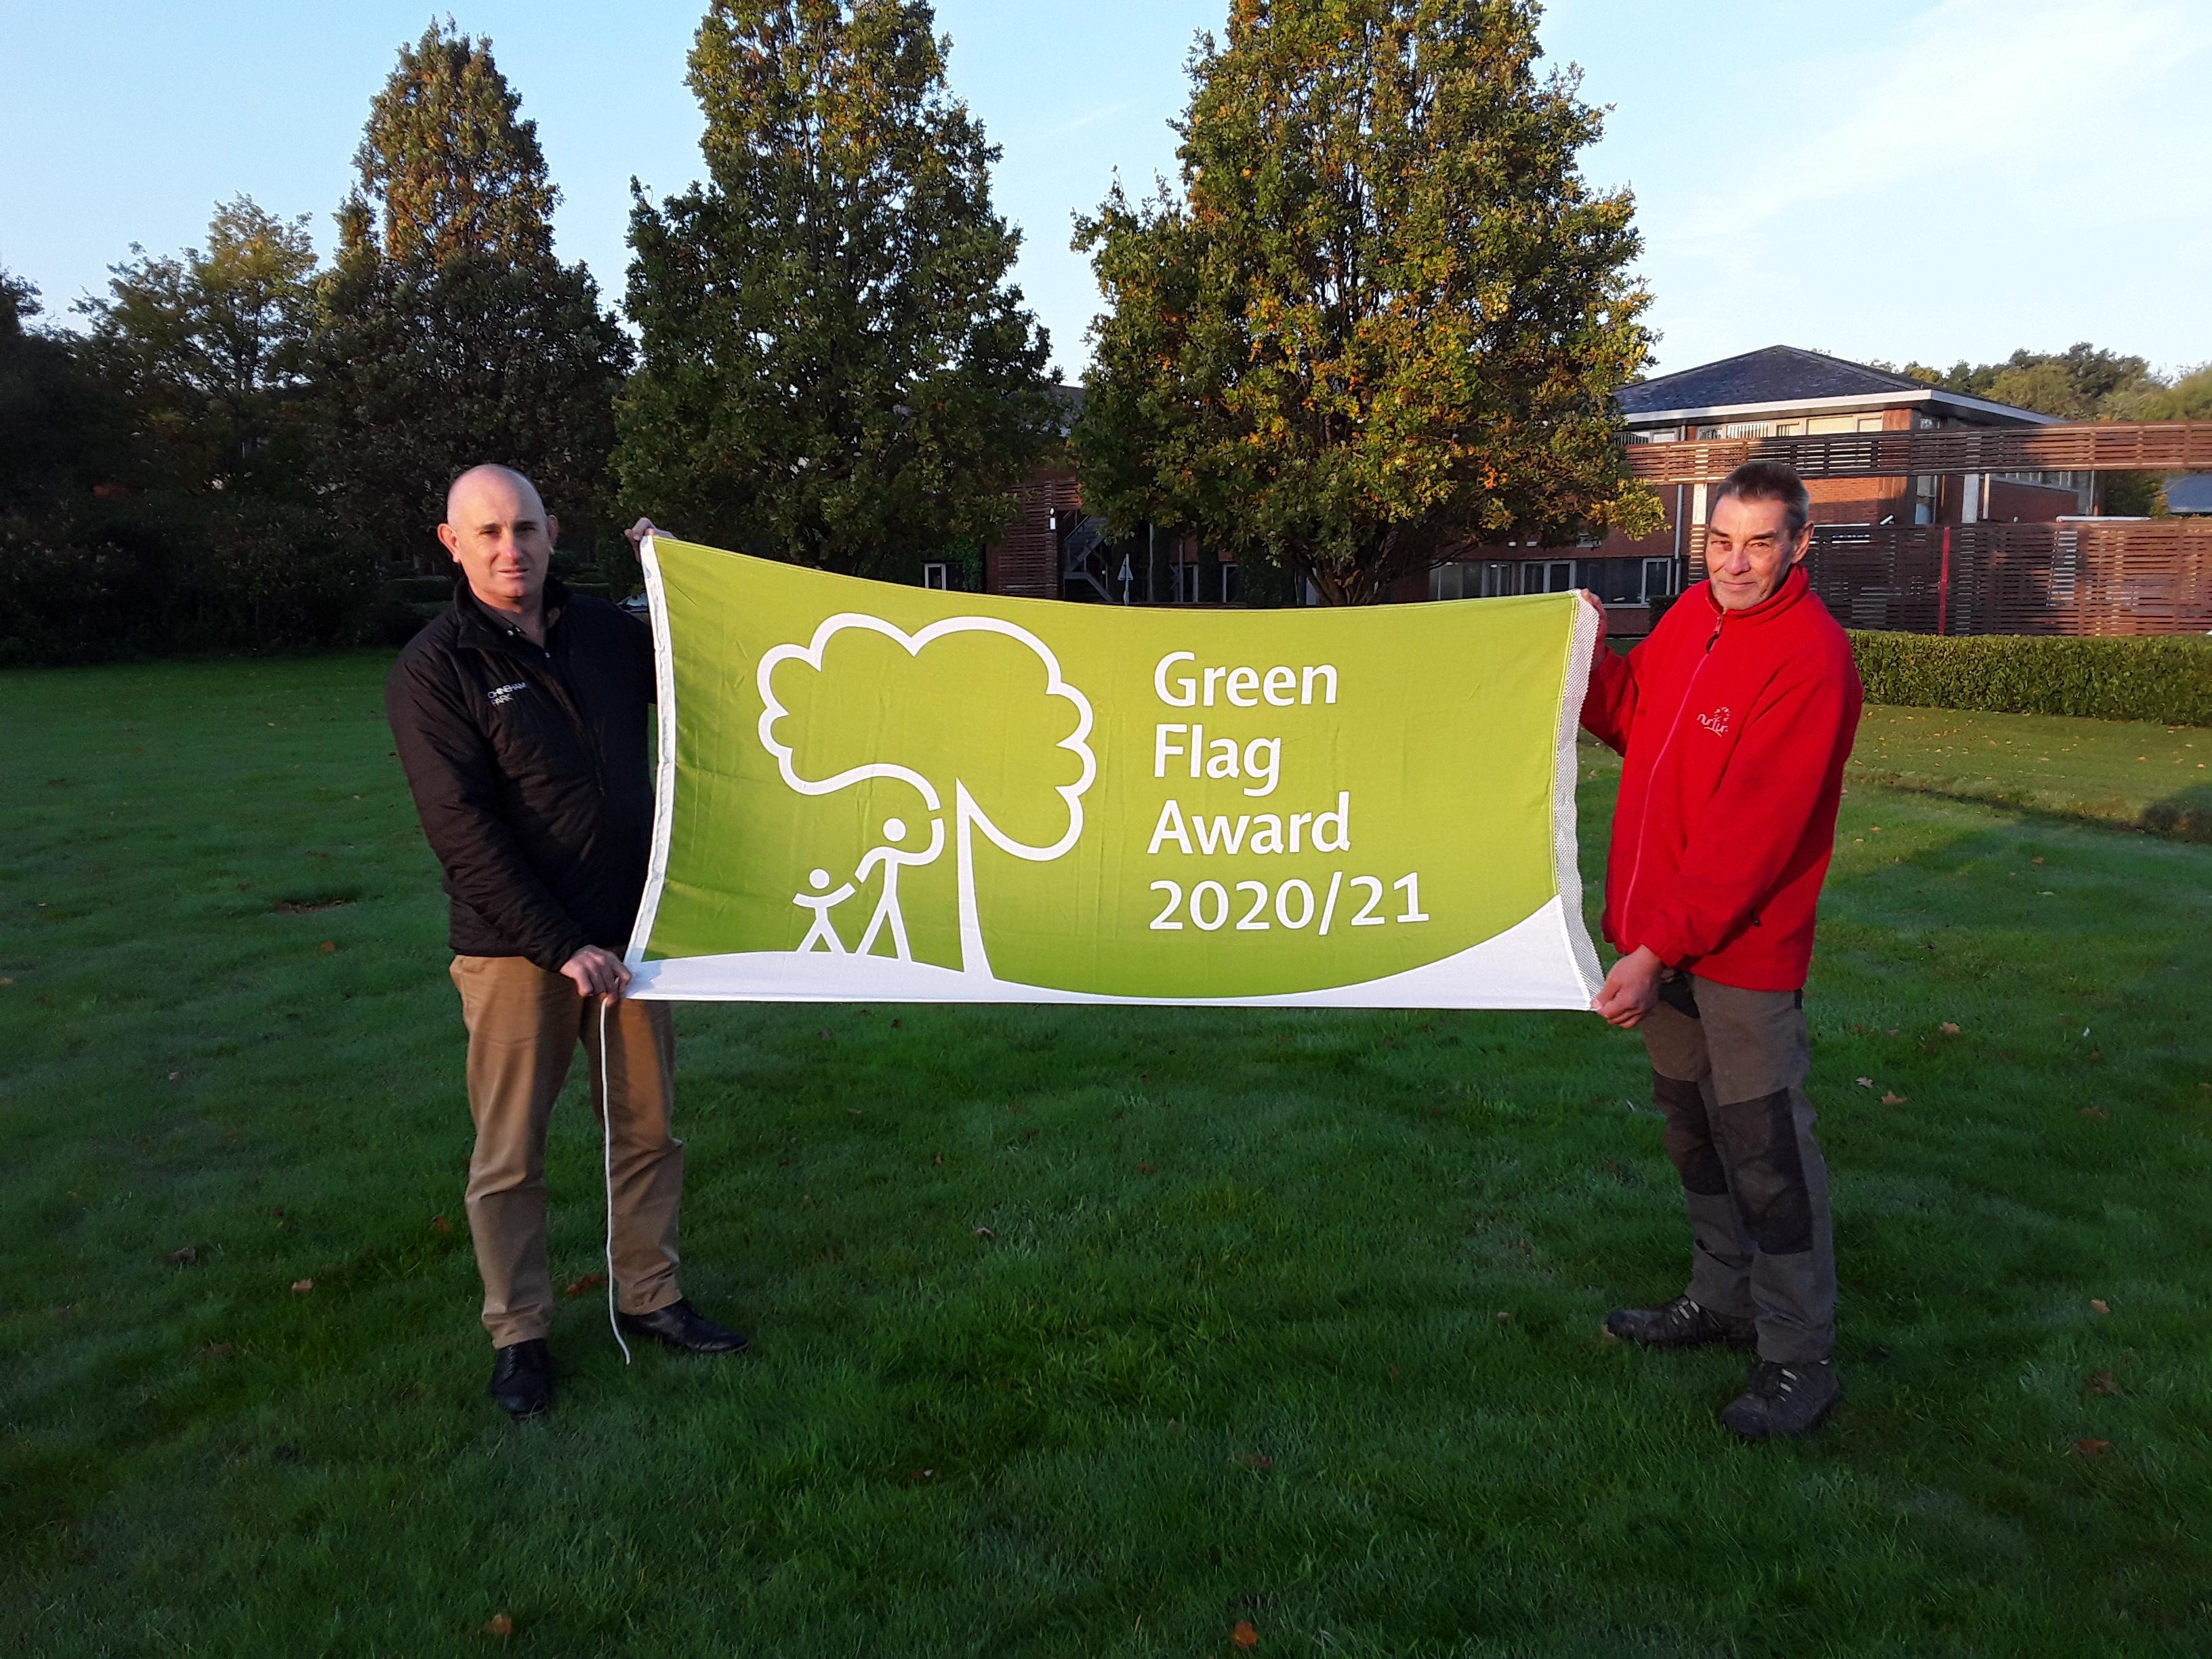 Frasers Property business parks win 2020/21 Green Flag Award